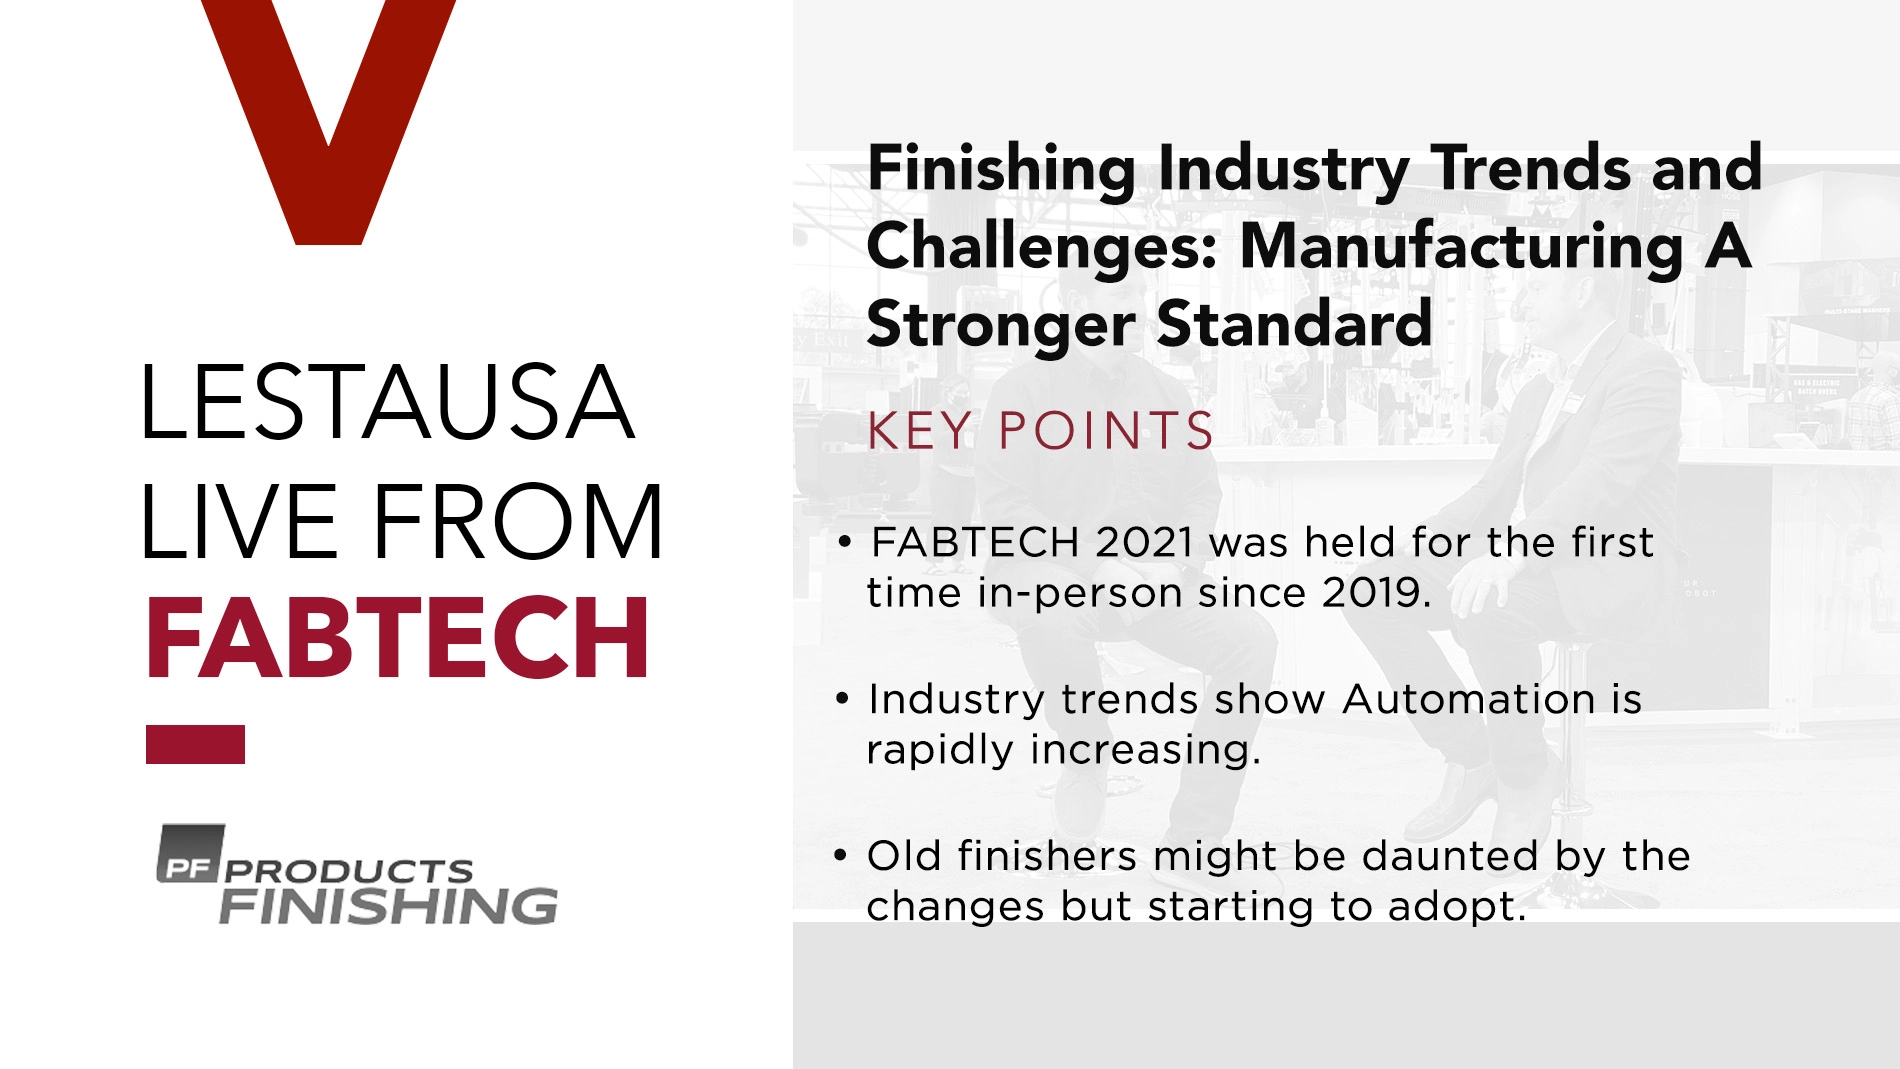 Finishing Industry Trends and Challenges: Manufacturing A Stronger Standard